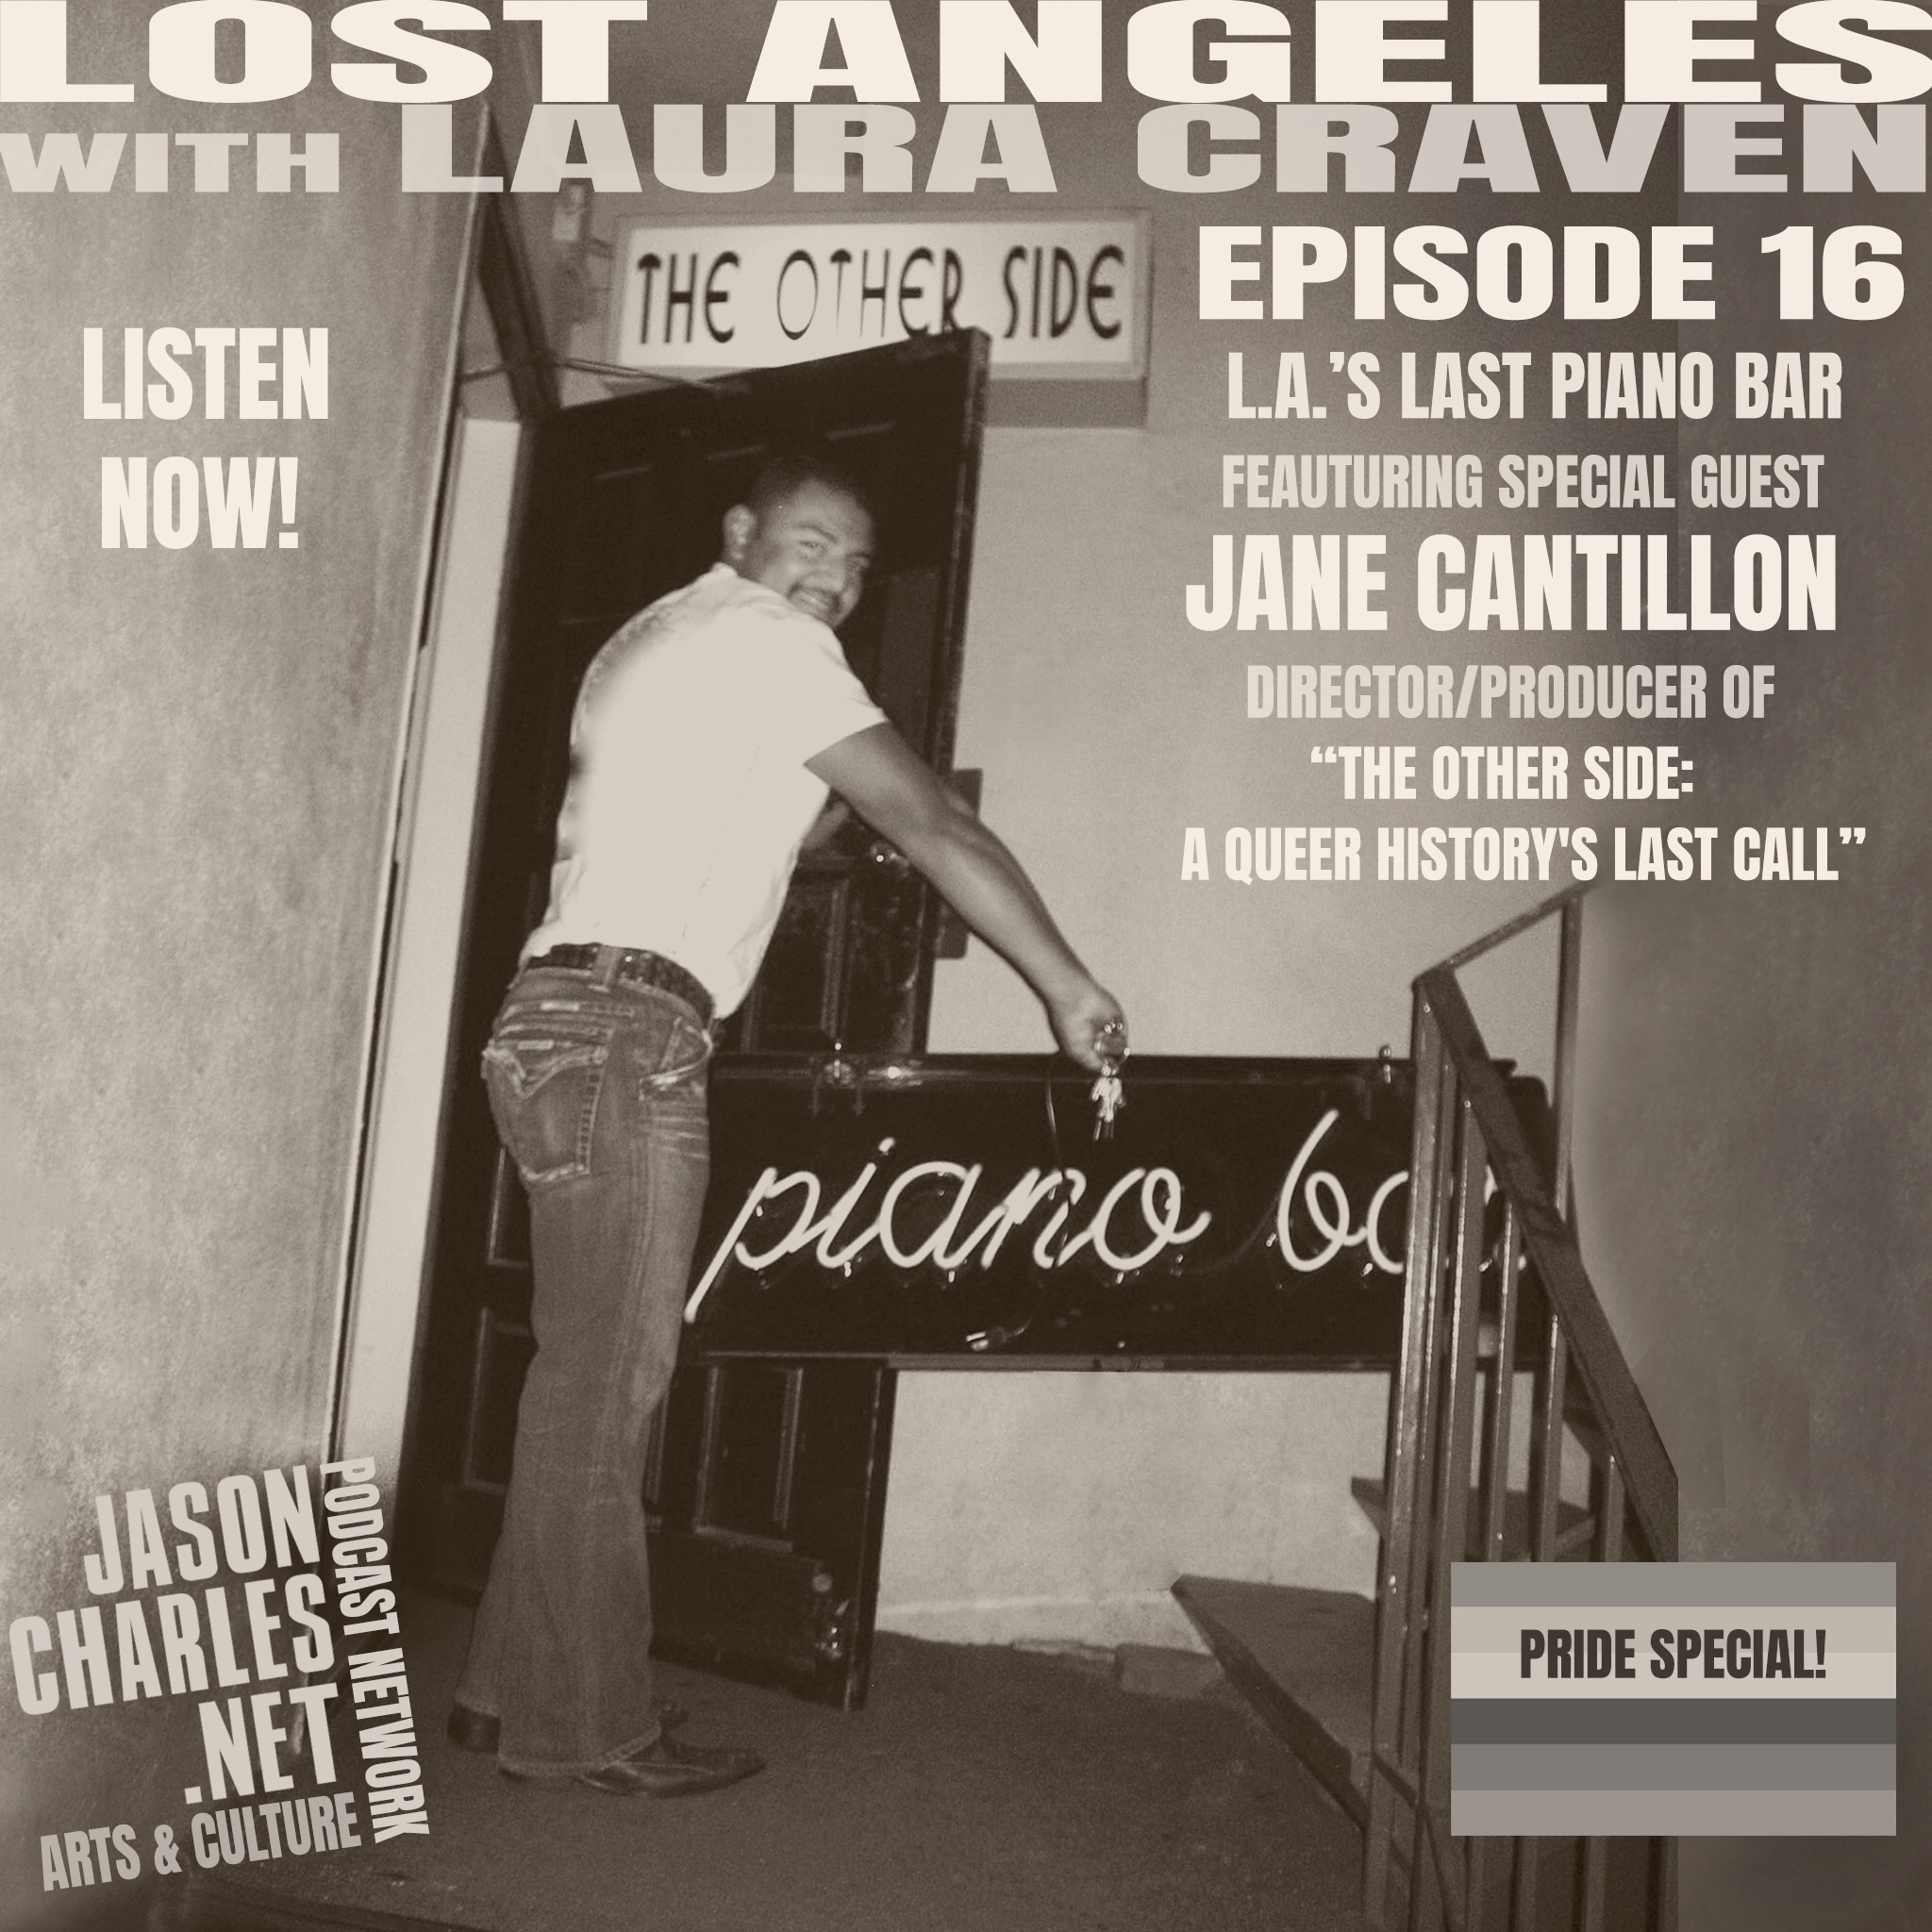 LOST ANGELES Episode 16 PRIDE Special: L.A.'S LAST PIANO BAR with filmmaker JANE CANTILLON